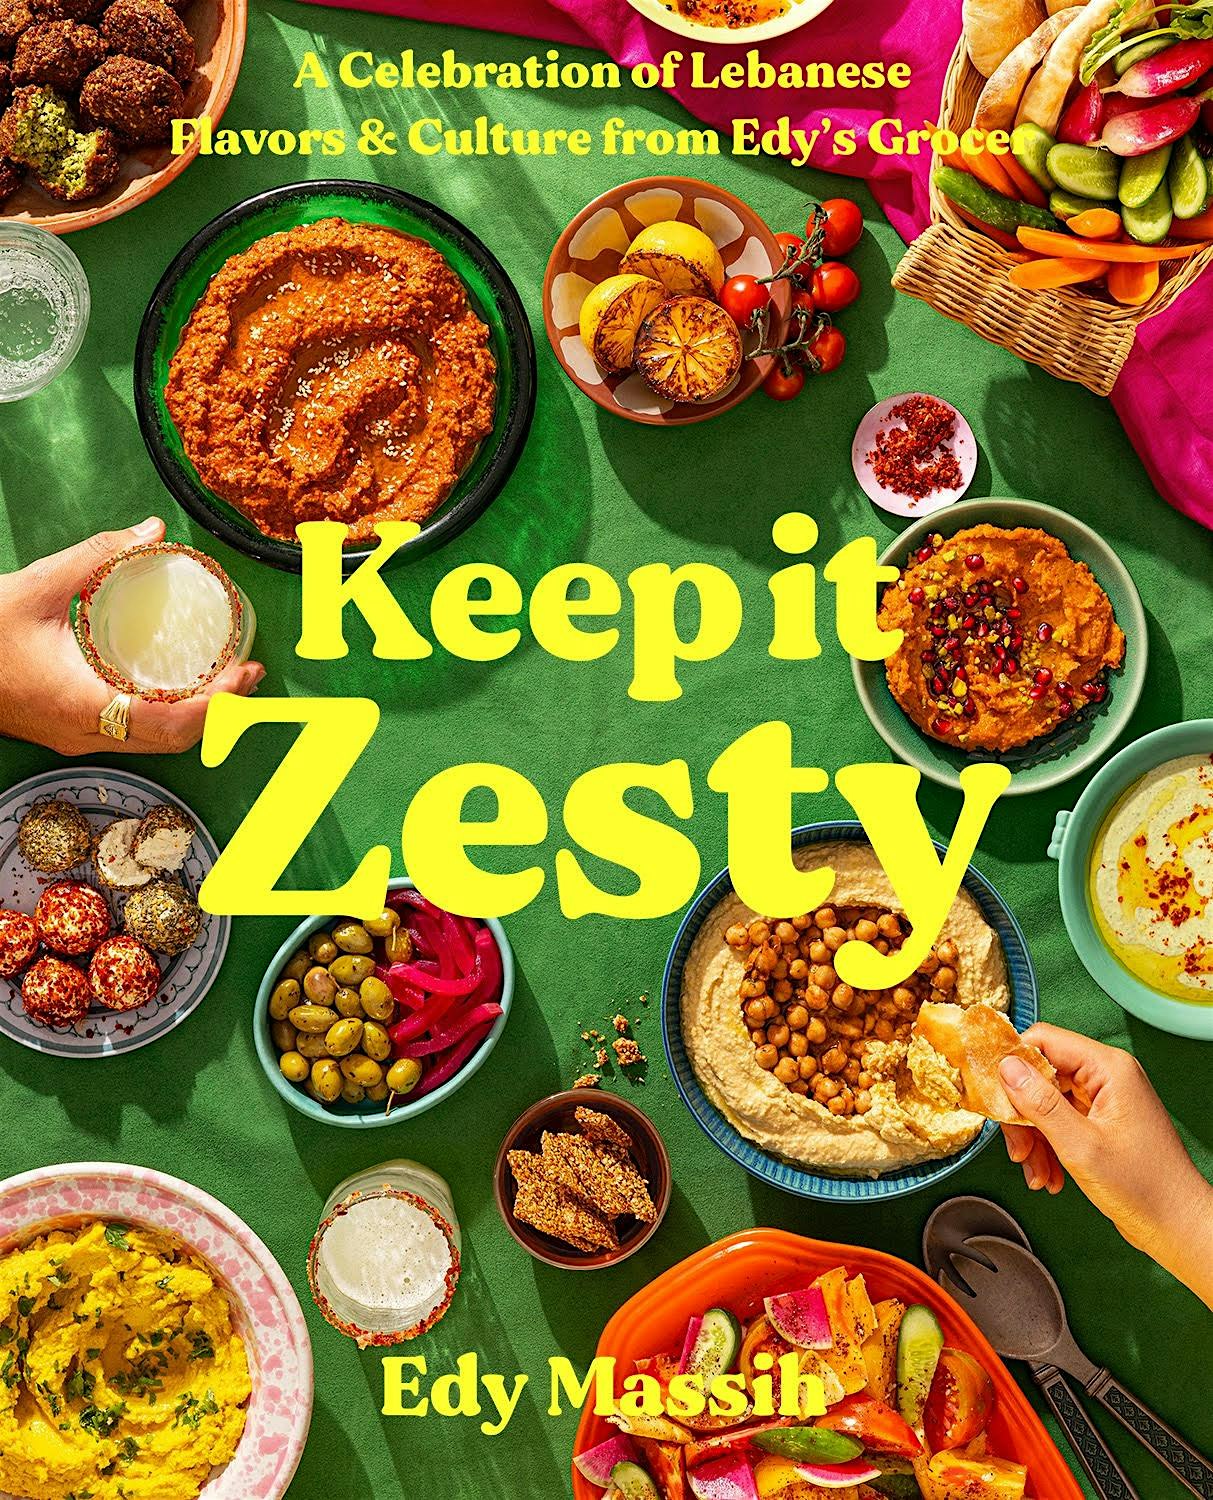 "Keep It Zesty" Book Tour with Chef Edy Massih